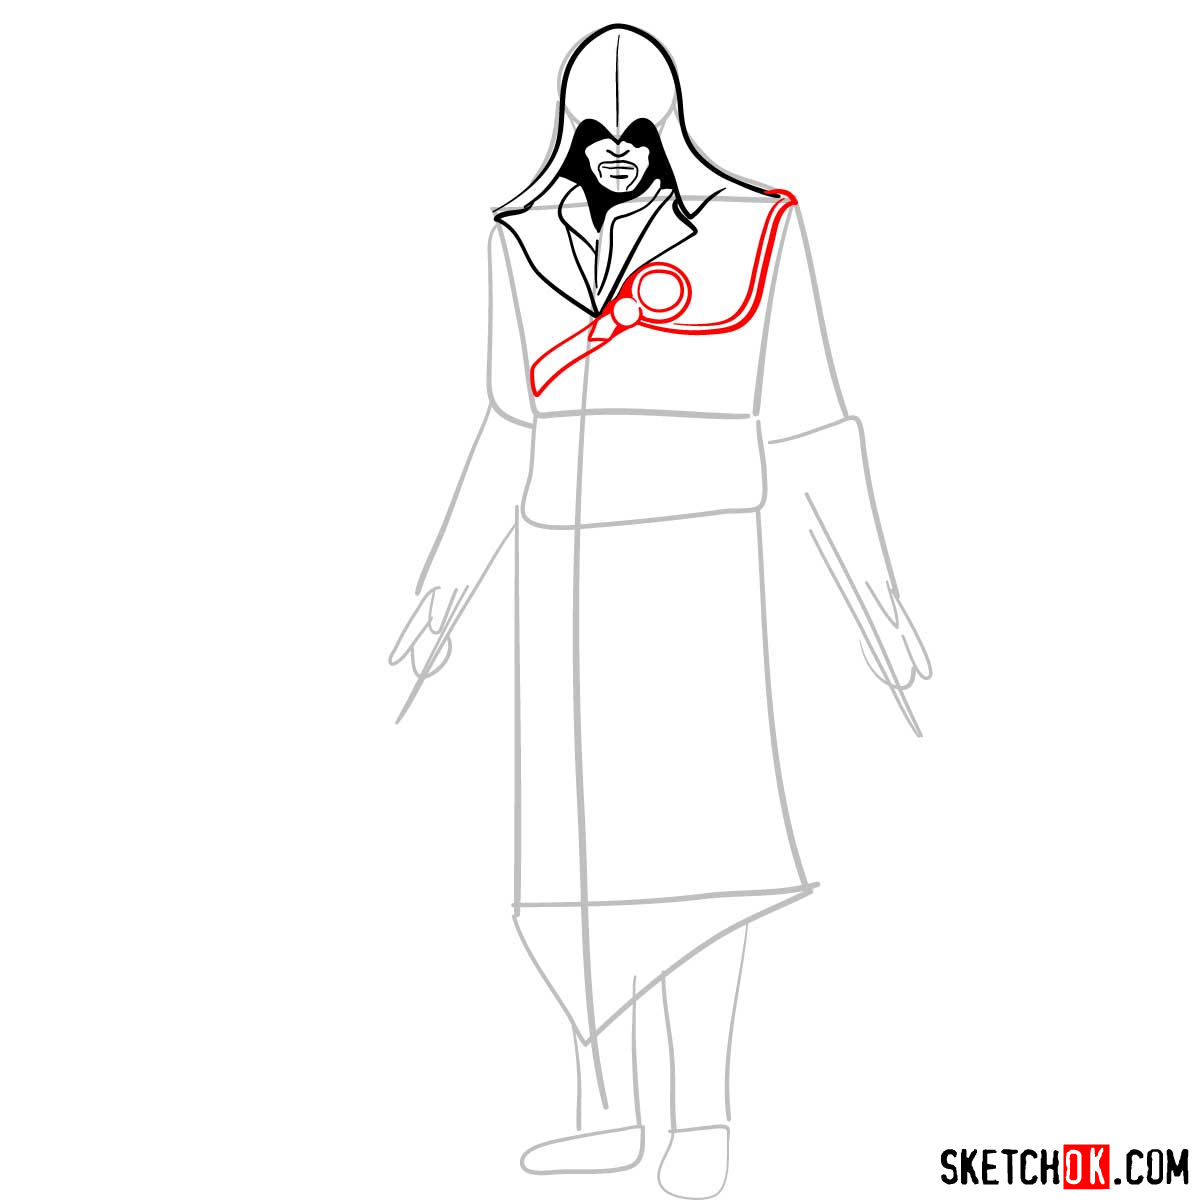 How to draw an Assassin from Assassin's Creed game - step 06